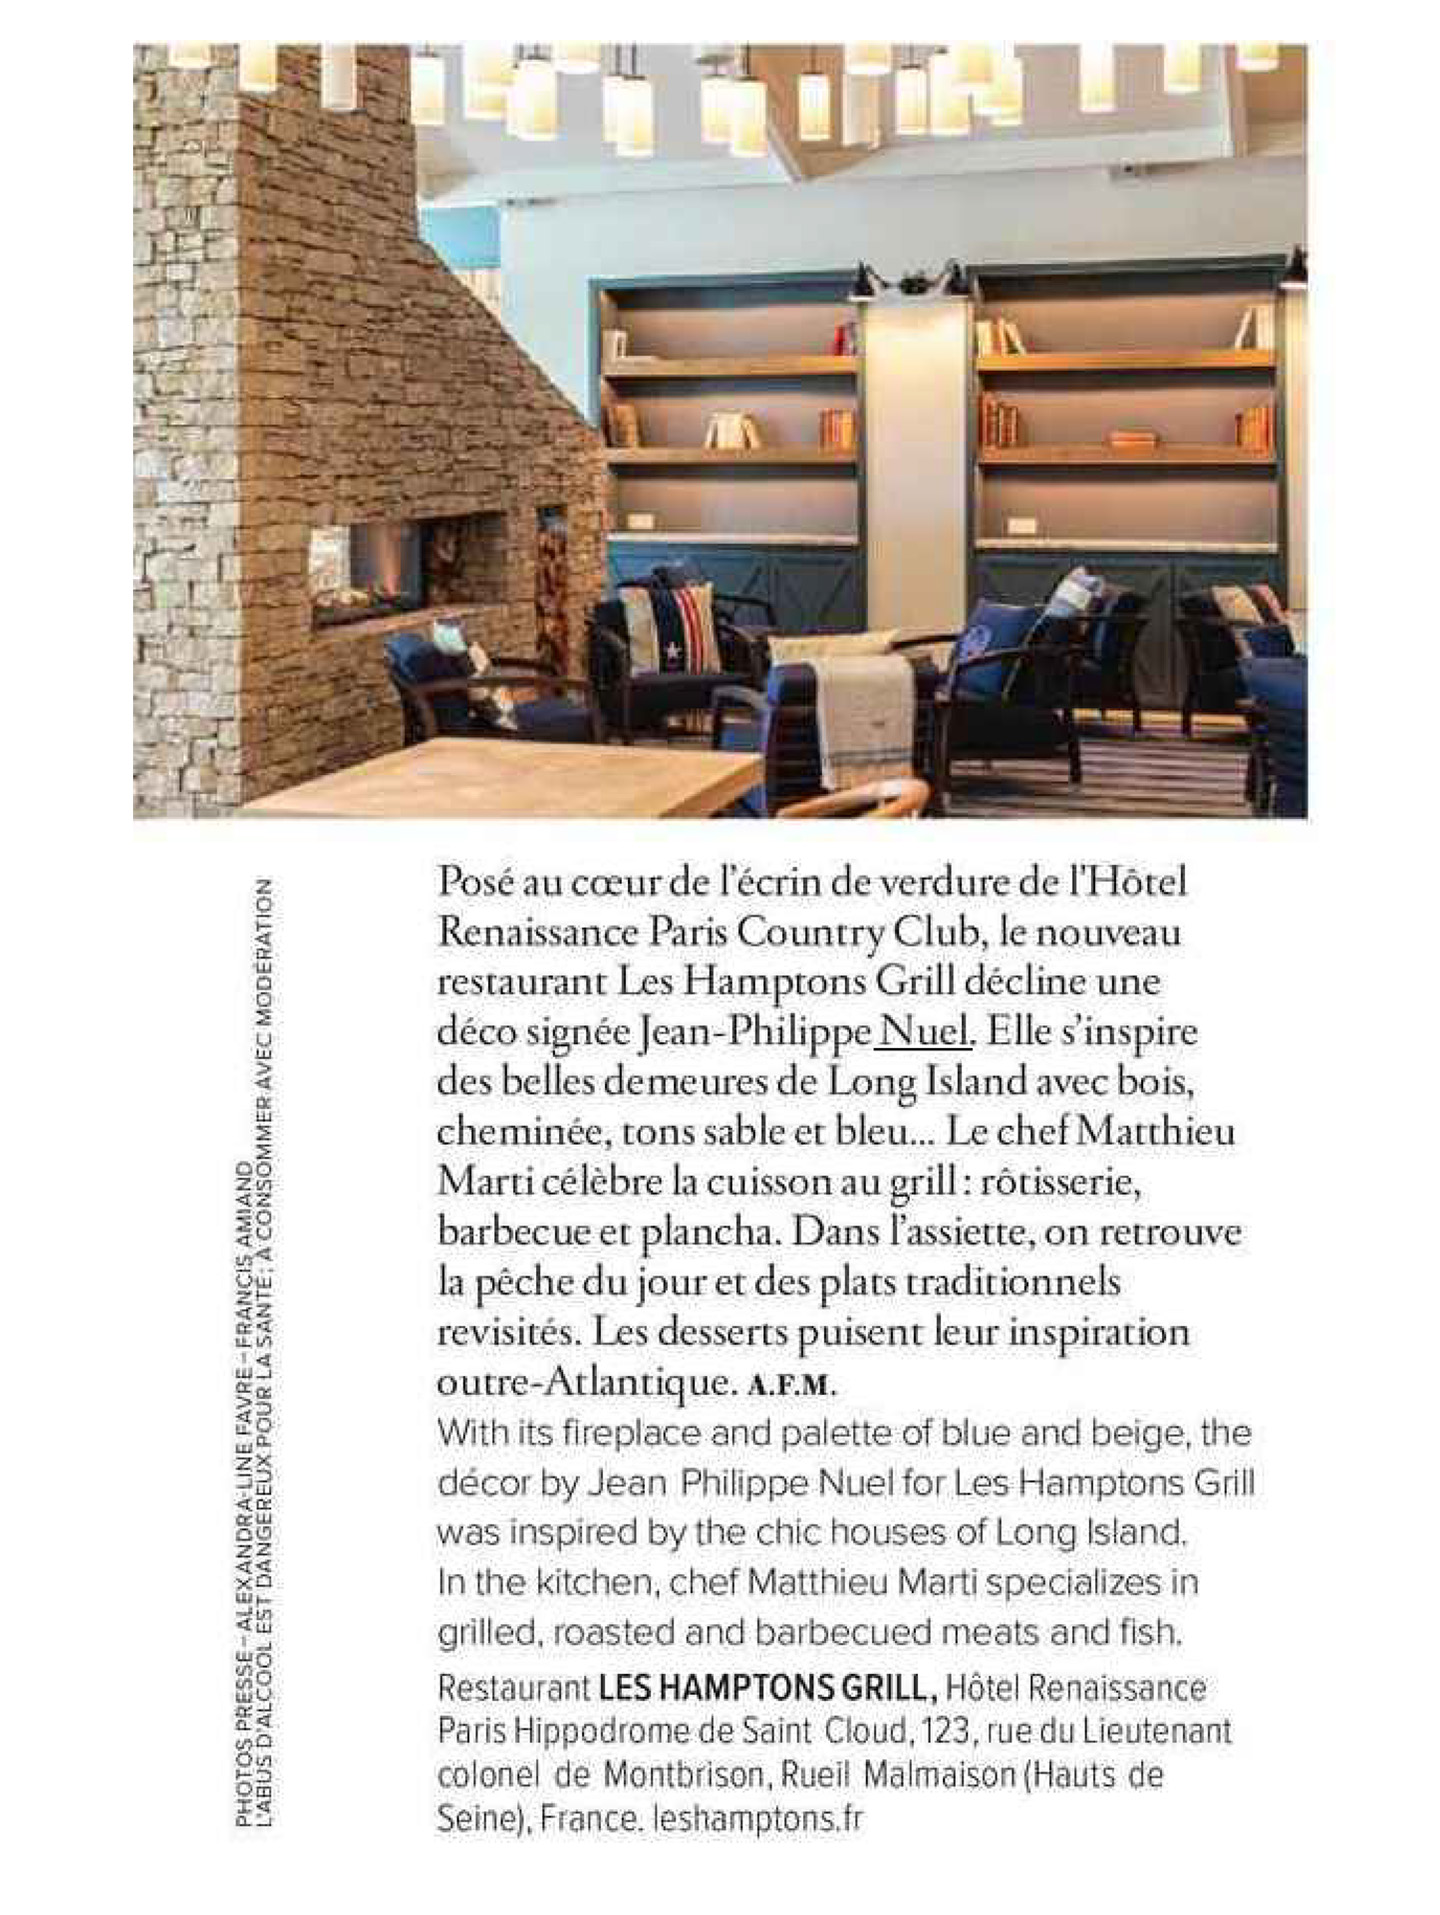 Article on Hamptons grill restaurant designed by jean-Philippe Nuel studio in Air France madame magazine, luxury restaurant, luxury interior design, French hotel